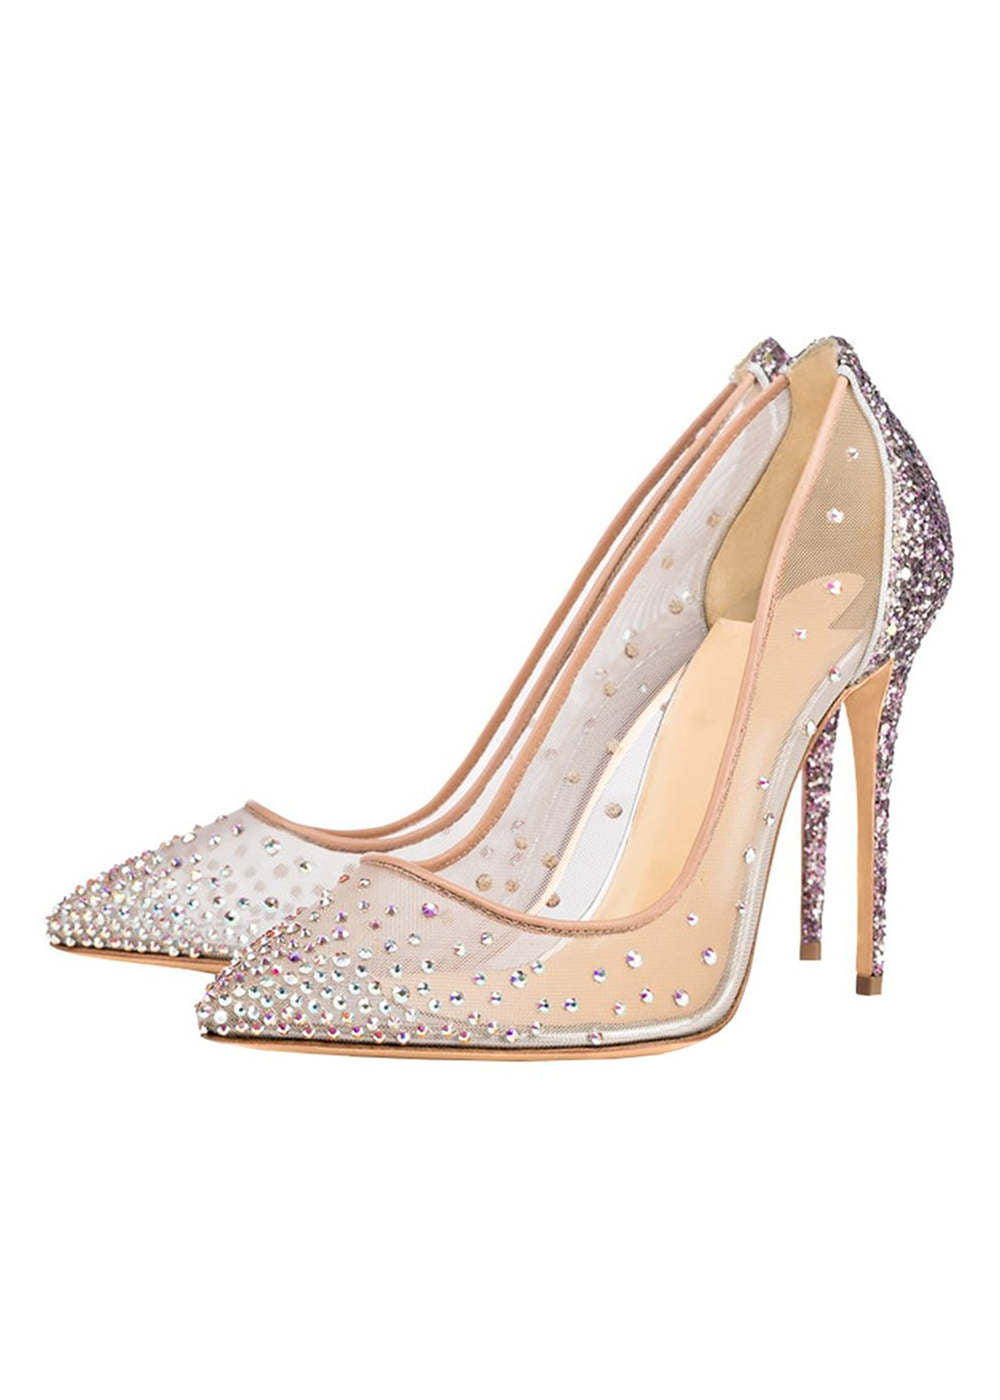 Stiletto Heel Mesh and Crystal Pumps Wedding Shoes